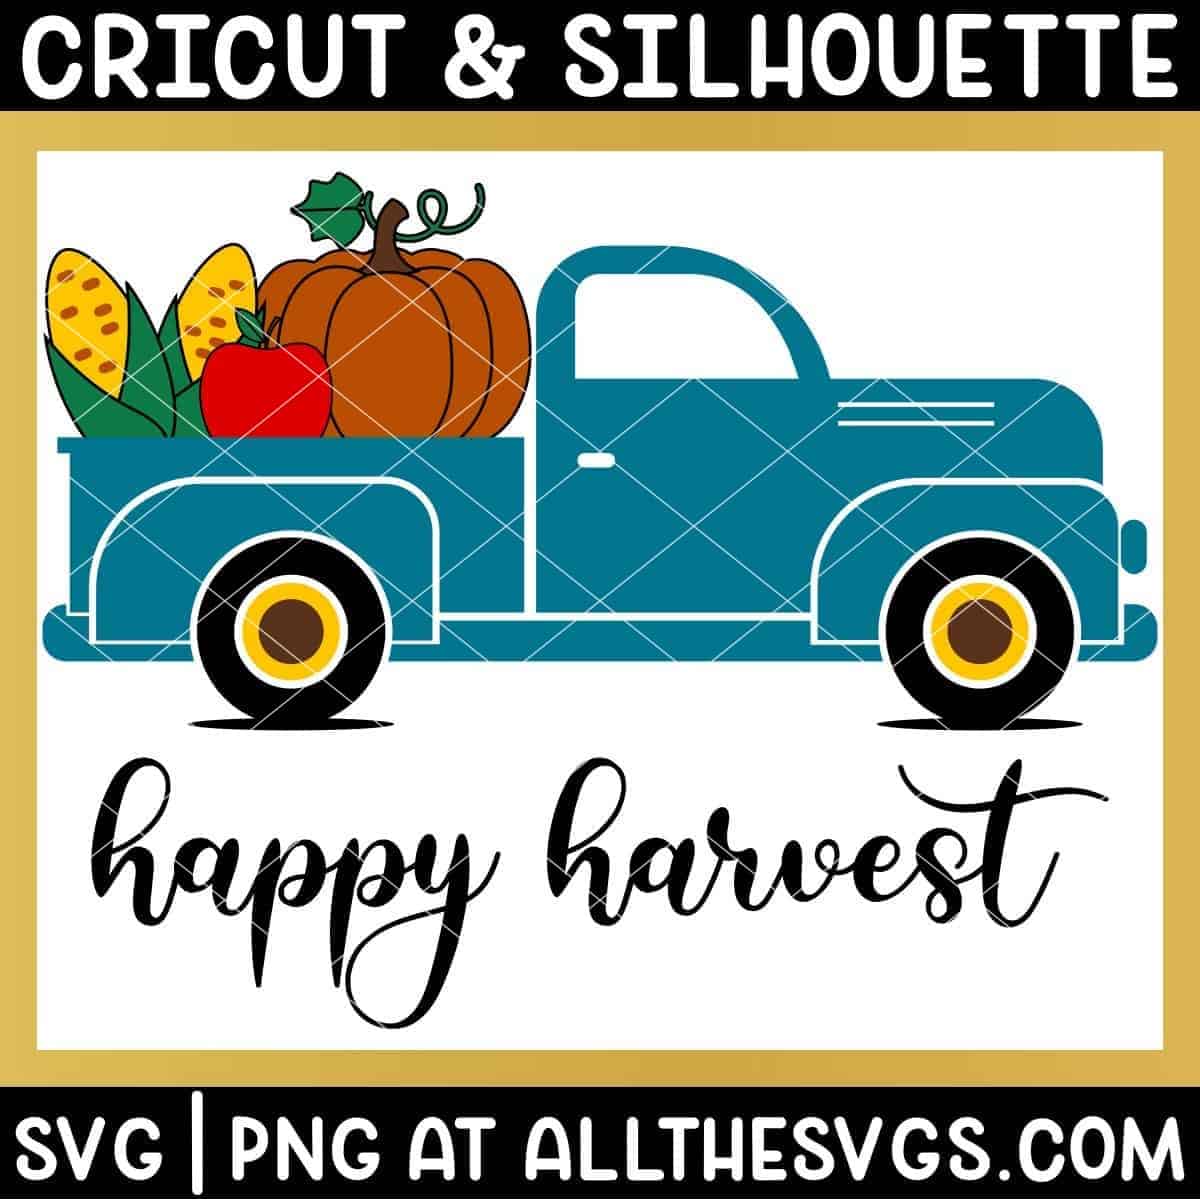 free fall vintage truck svg png with happy harvest text.